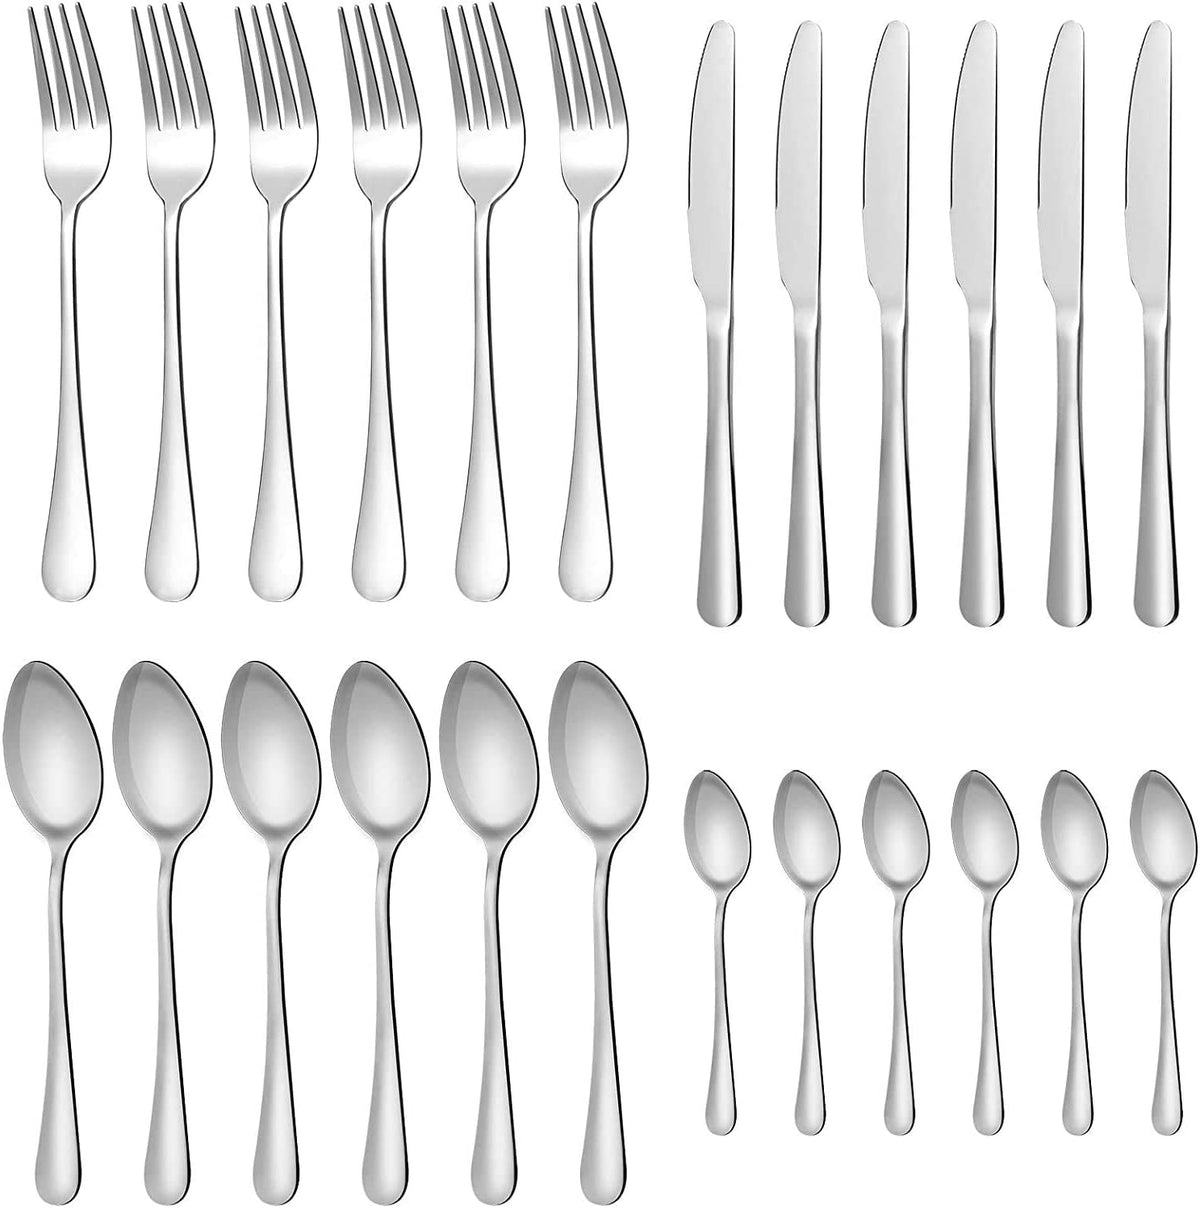 Cutlery Flatware Set，24 Piece Silverware Set with Gift Box Stainless Steel Tableware Dinnerware Sets Knife Fork Spoon, Service for 6 Multipurpose Use Safe for Home Kitchen Party - Silver - FoxMart™️ - Tuevob